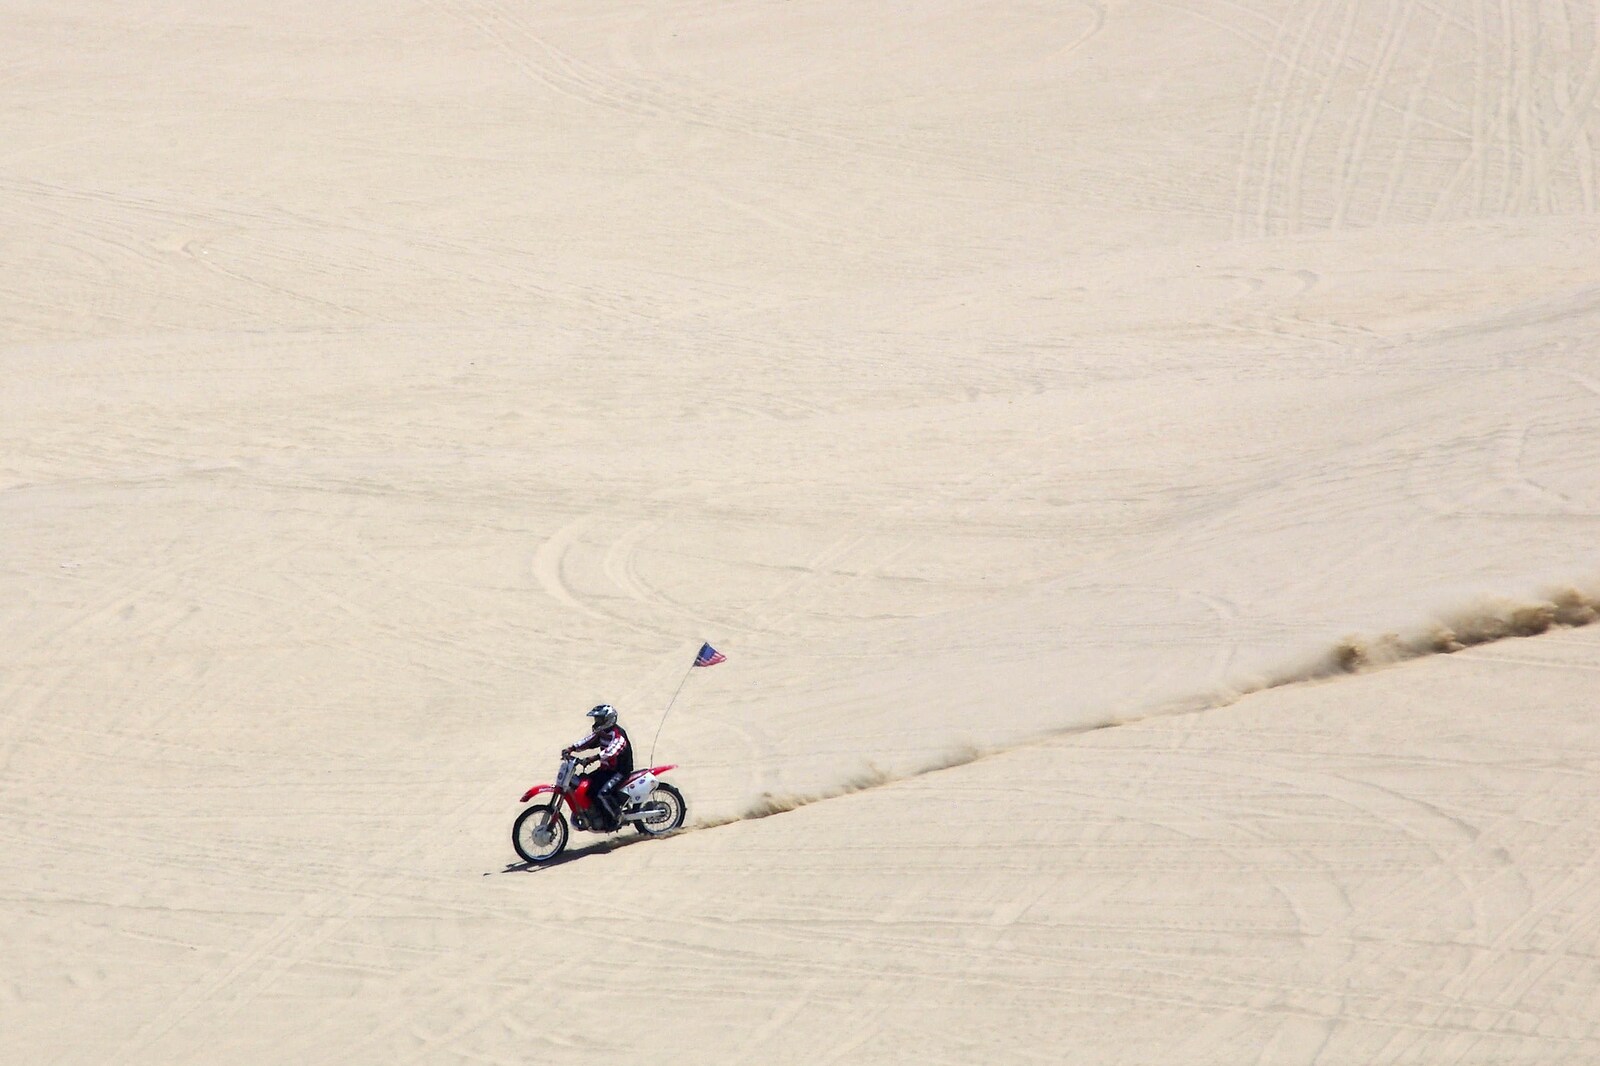 A guy on a bike razzes down a huge dune from San Diego Seven: The Desert and the Dunes, Arizona and California, US - 22nd April